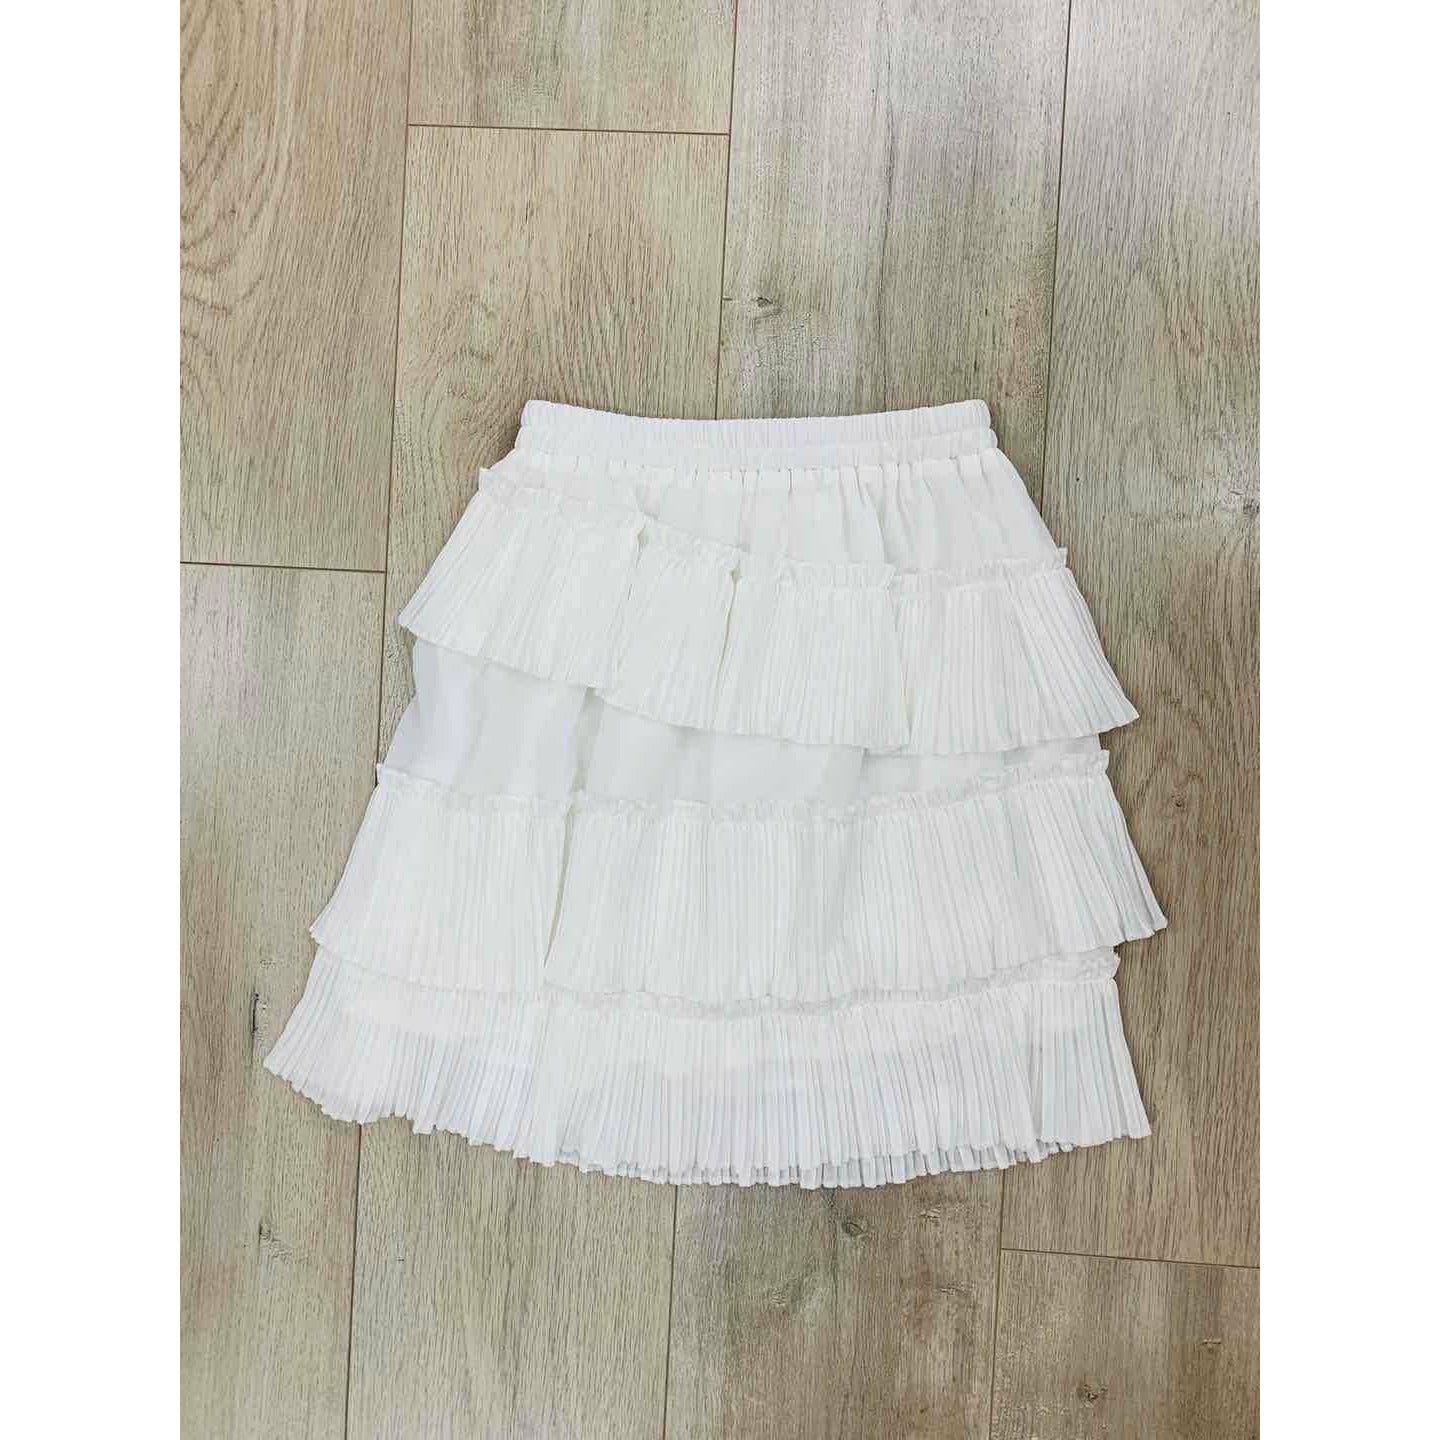 Dixon Skirt - White Not specified